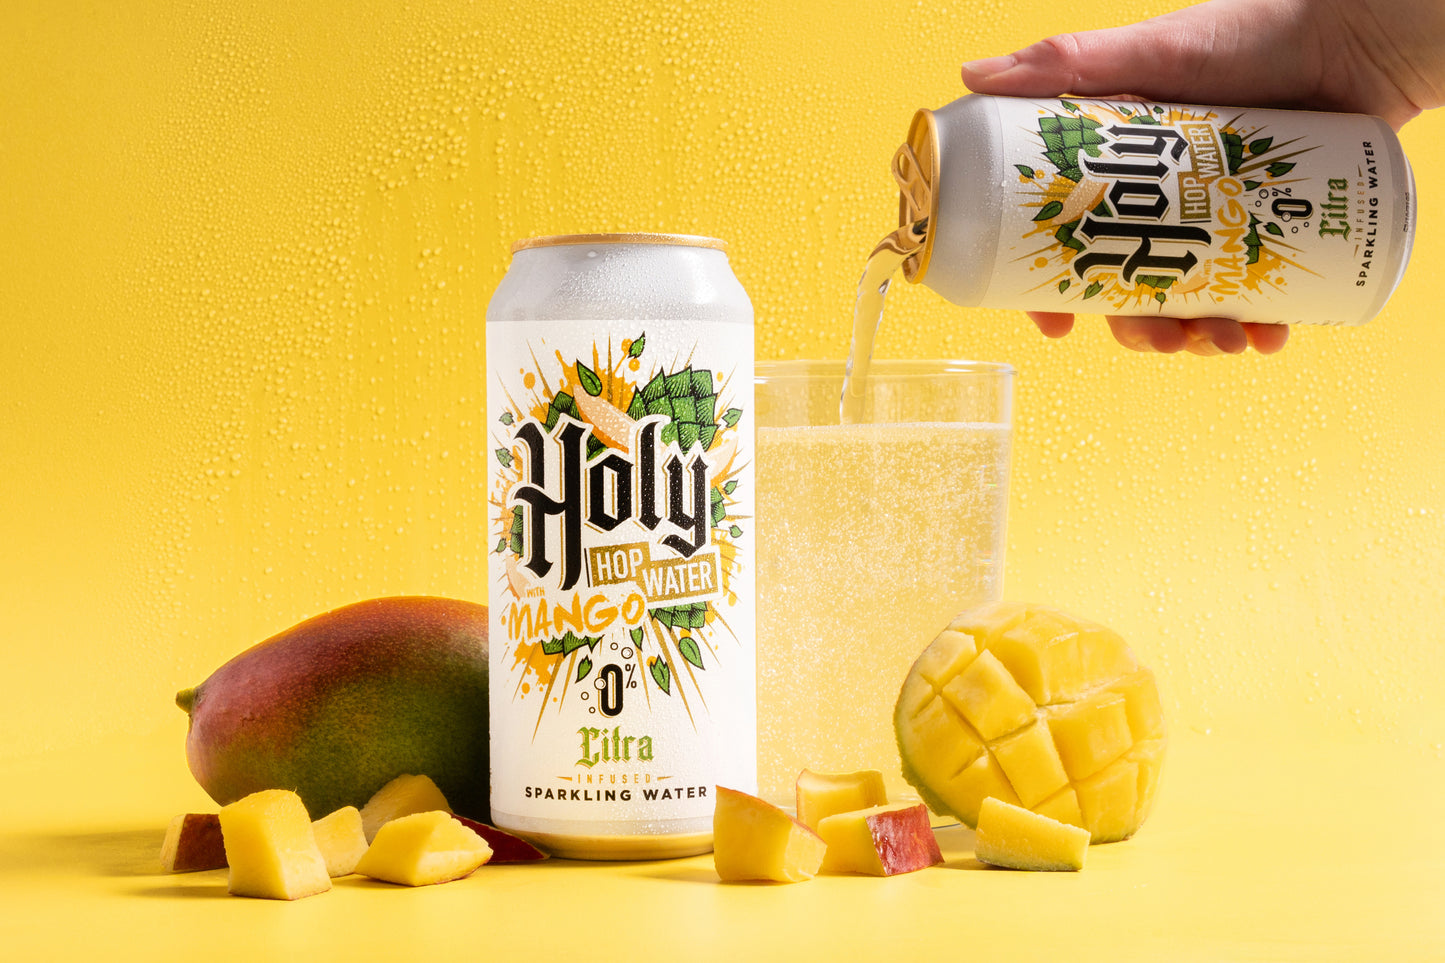 12 PACK // HOLY HOP WATER MANGO // CITRA INFUSED SPARKLING HOP WATER